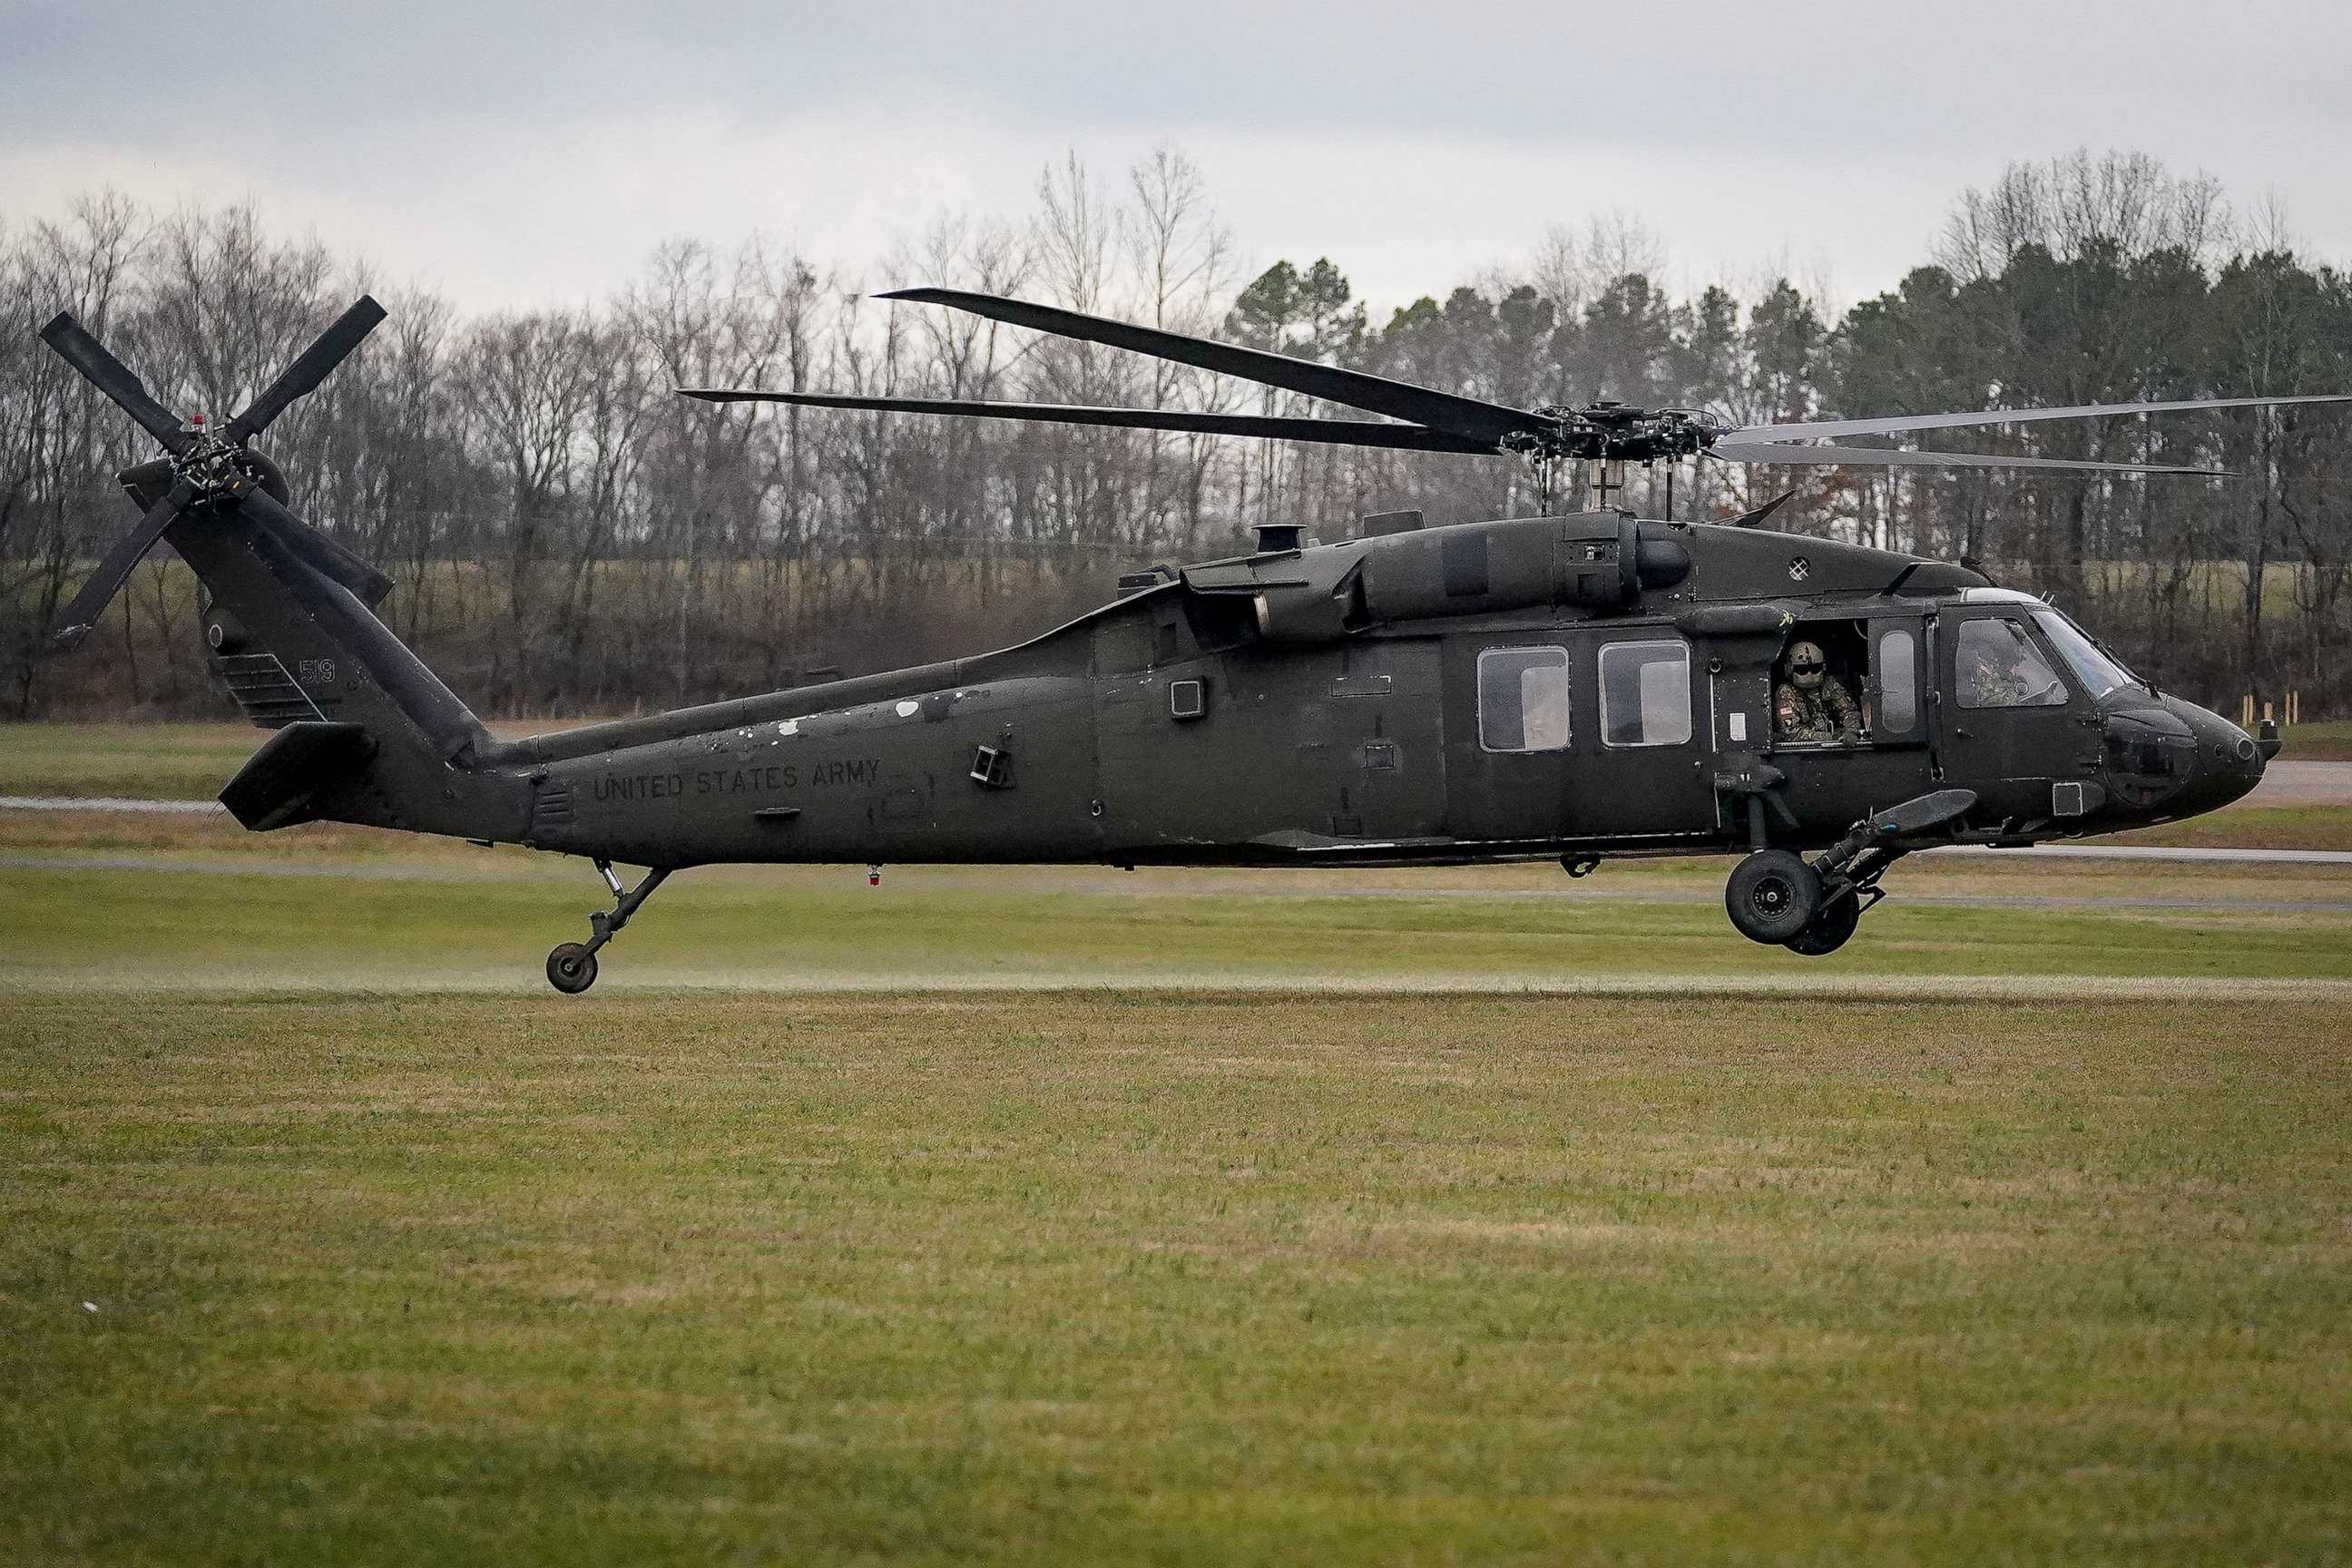 PHOTO: A UH-60 Blackhawk helicopter hovers at The United States Army Air Assault School on Fort Campbell, Kentucky. Feb 13, 2020.